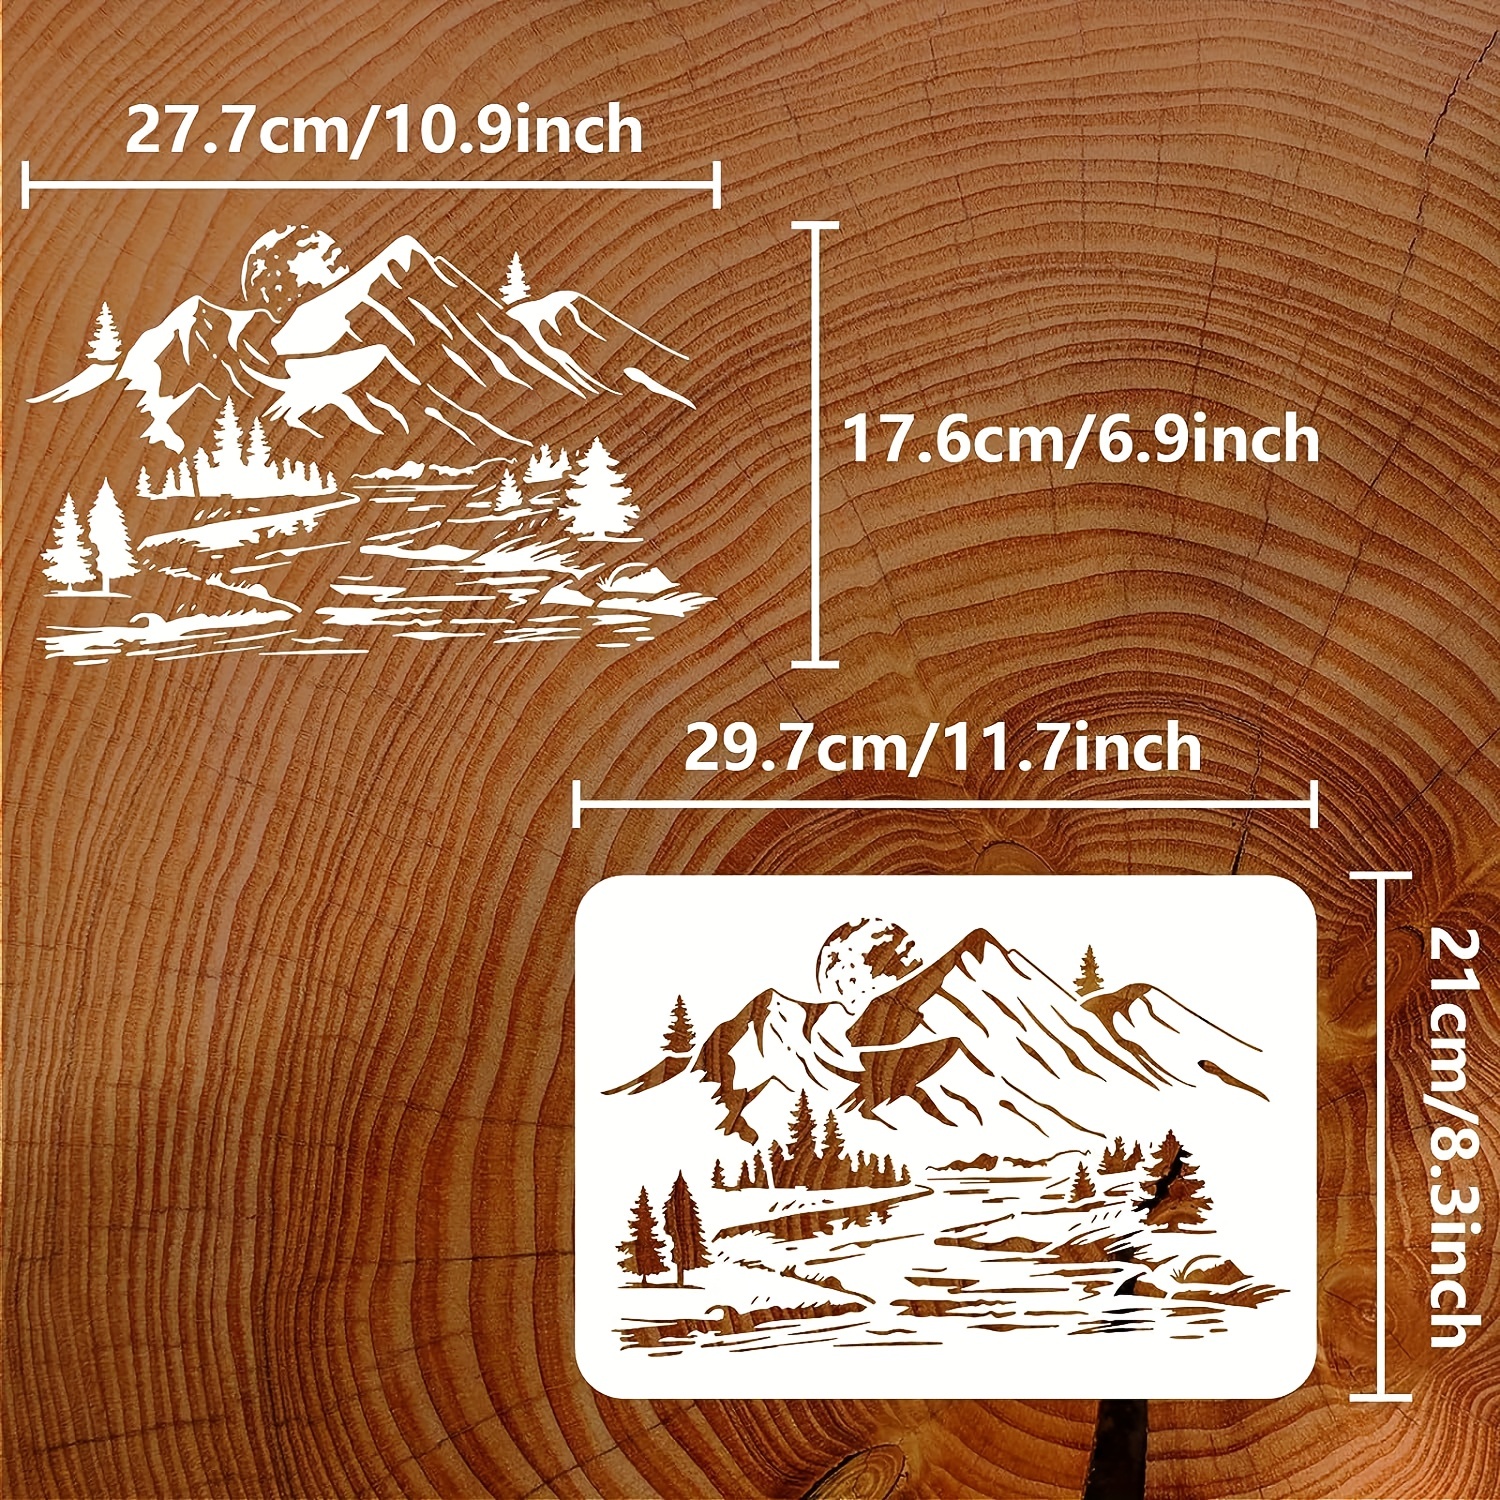  Mountain Stencils For Painting On Wood Burning Stencils And  Patterns Reusable Nature Deer Tree Stencils For Crafts Canvas Furniture  Wall Drawing Pattern Decorative